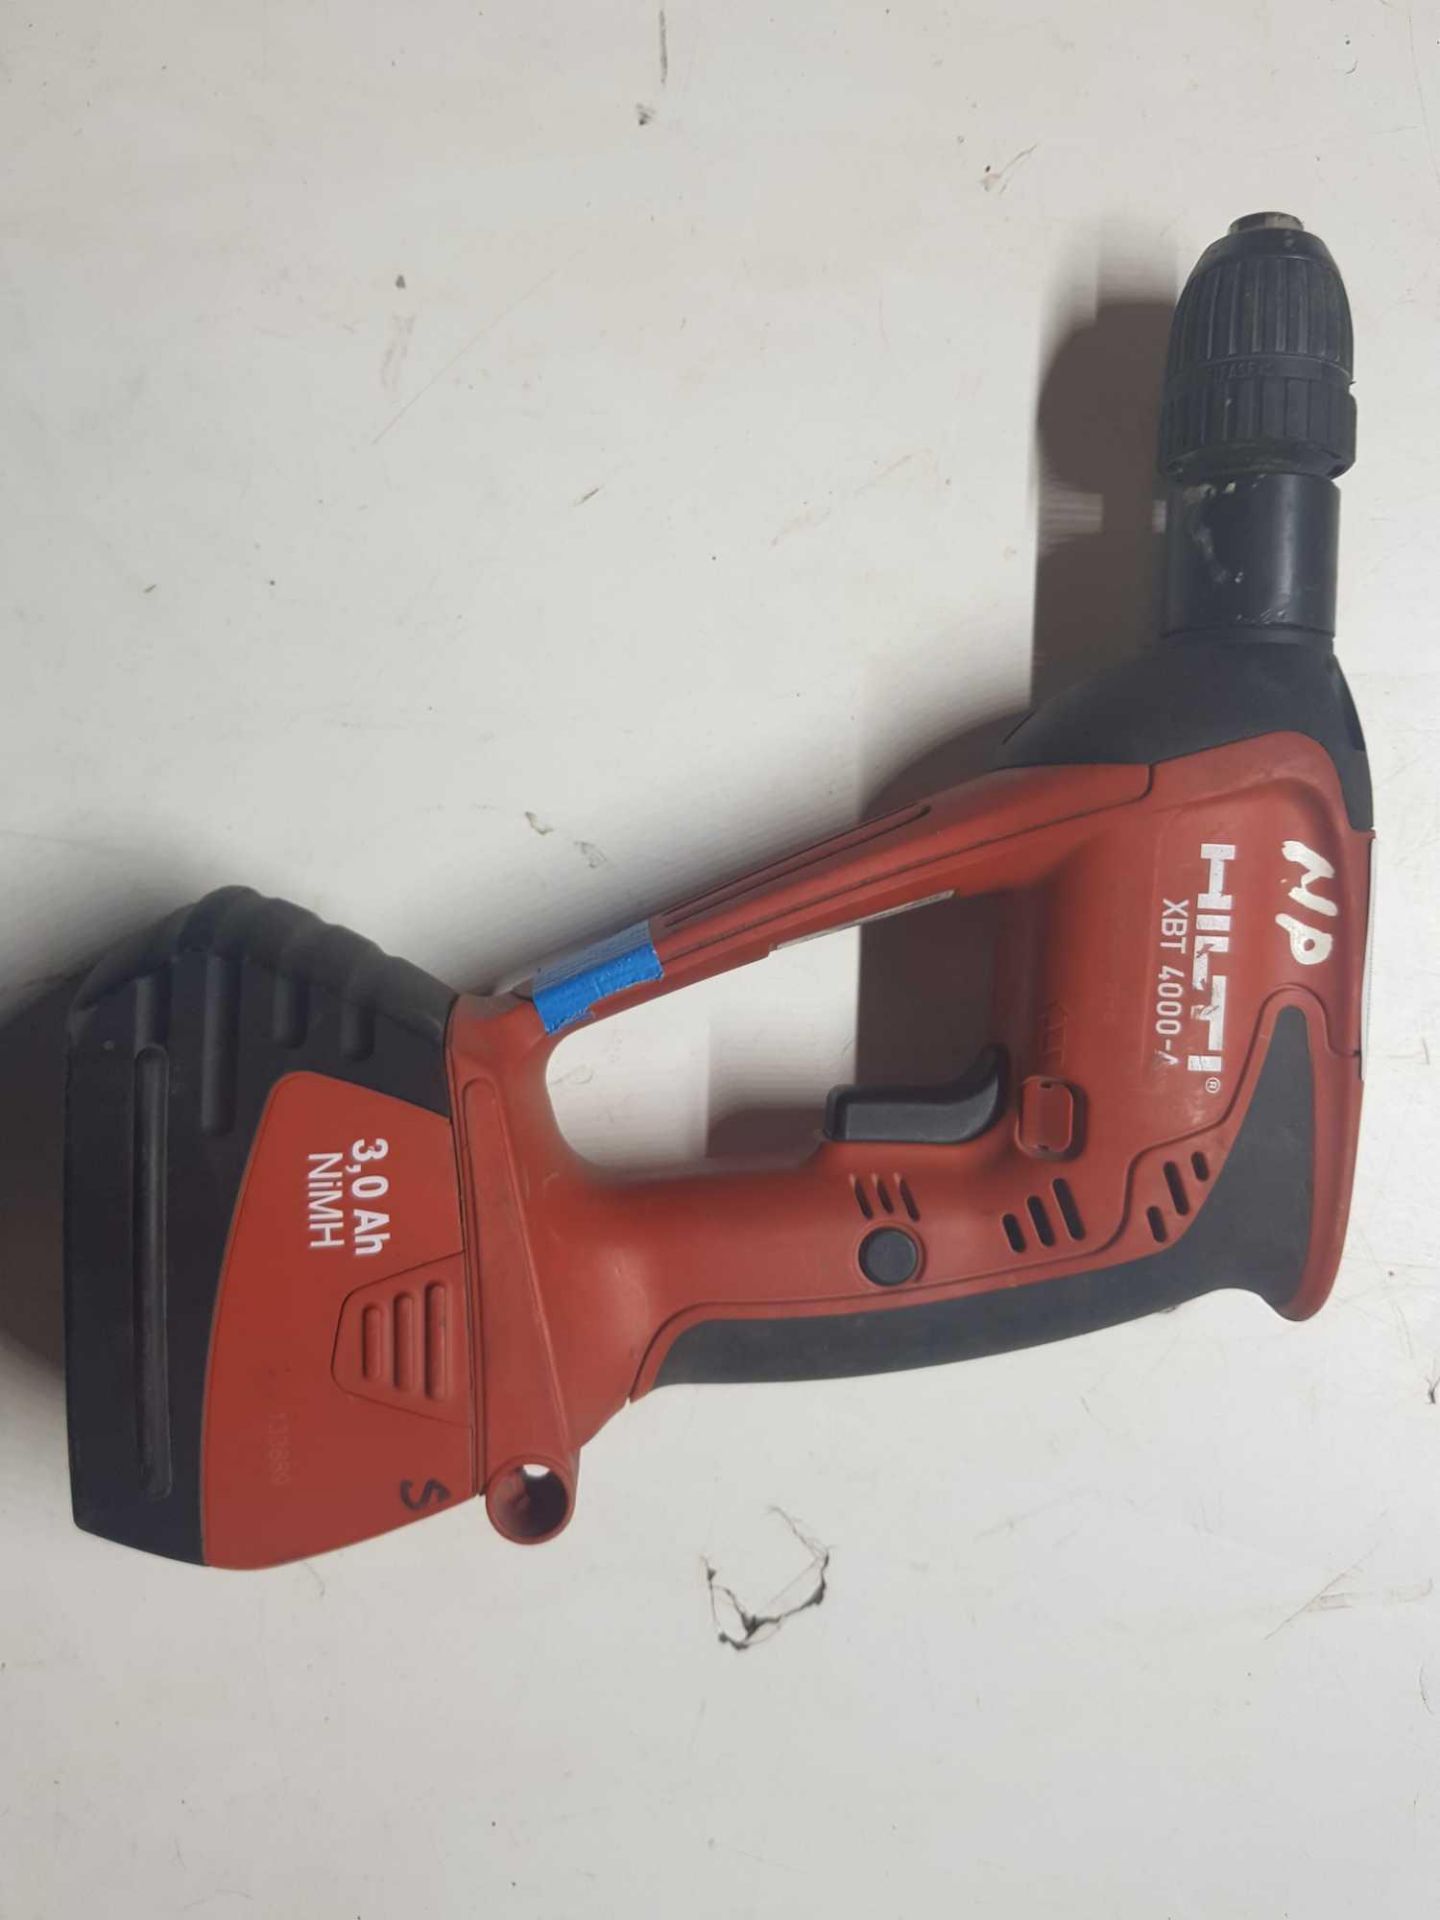 Hilti cordless drill model xbt 4000A - Image 2 of 2